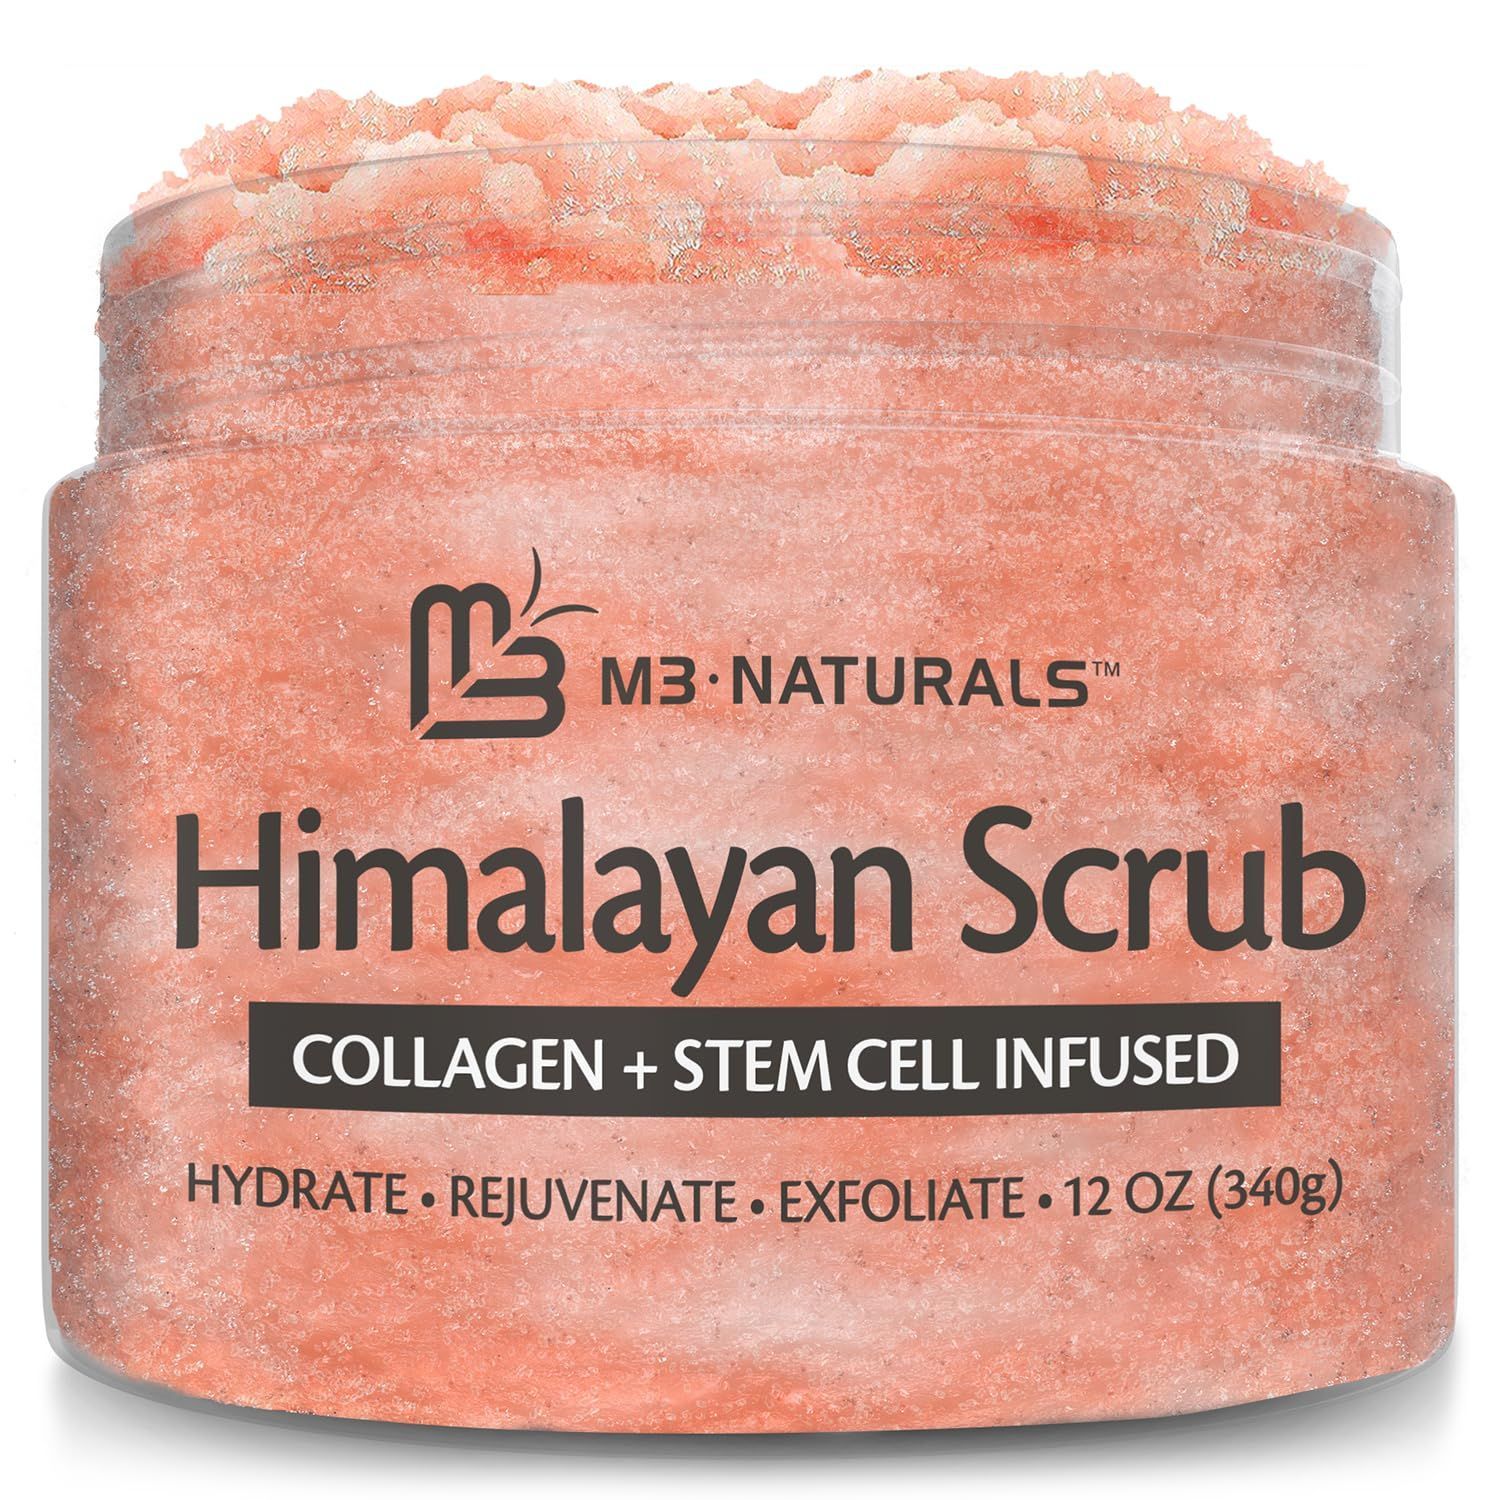 A jar of himalayan scrub with collagen and stem cell infused